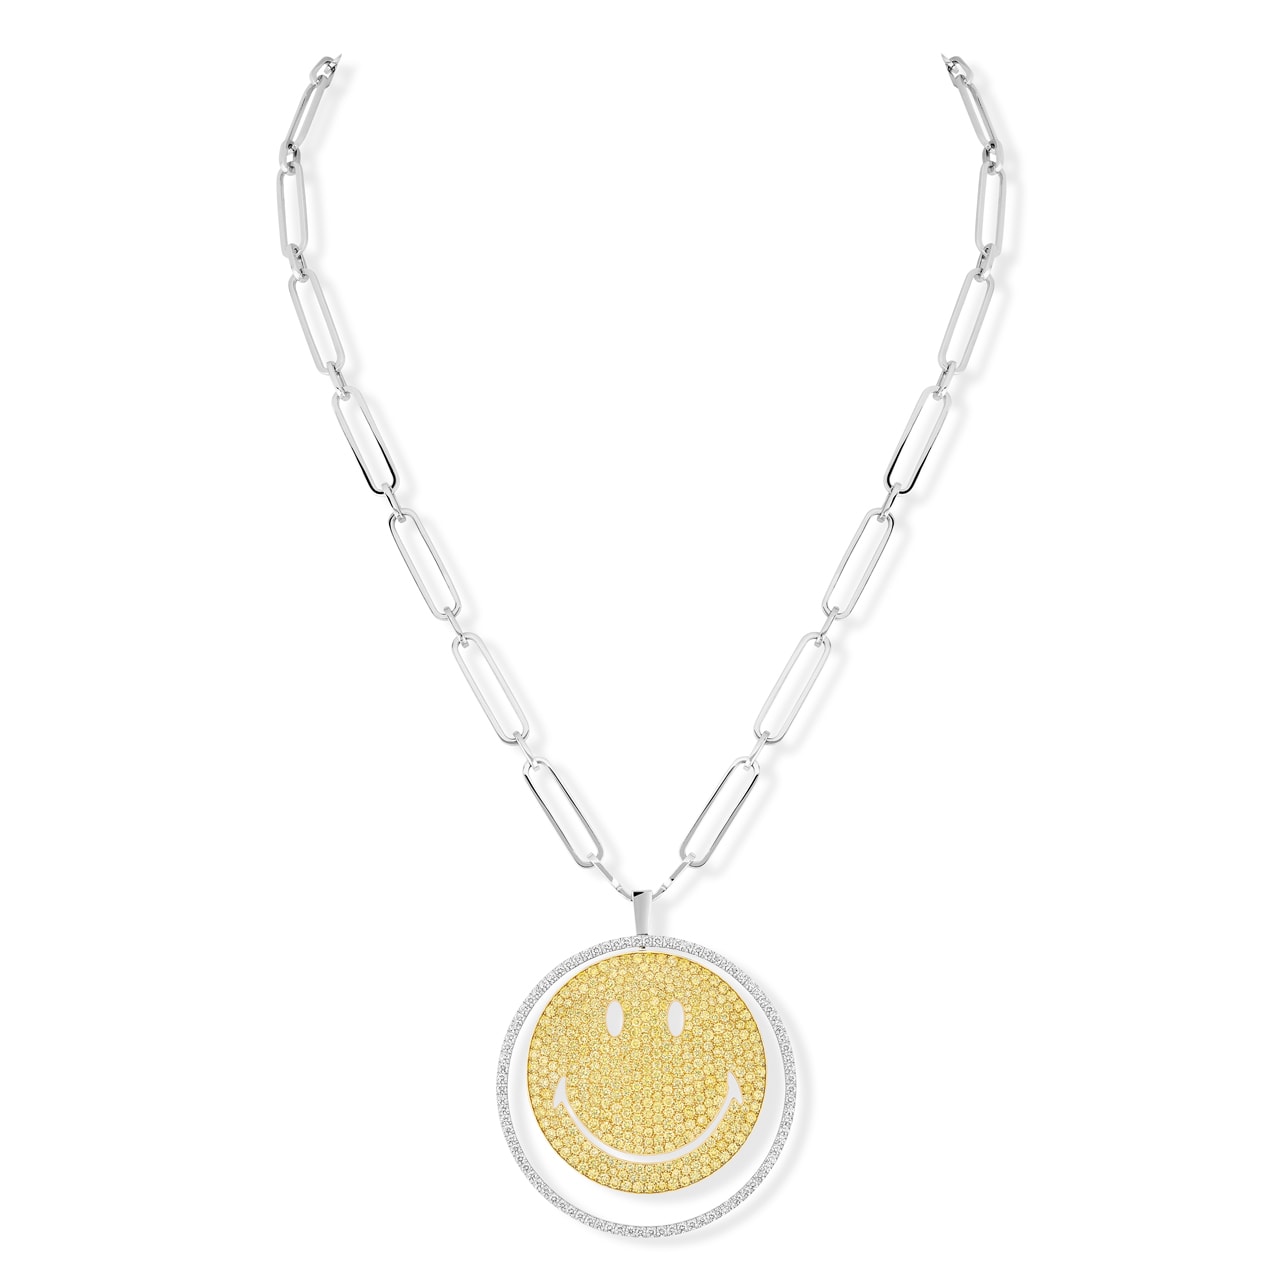 SMILEY Messika Jewelry Set To Release a 7.90 Carat Diamond Novelty for SMILEYs 50th Anniversary